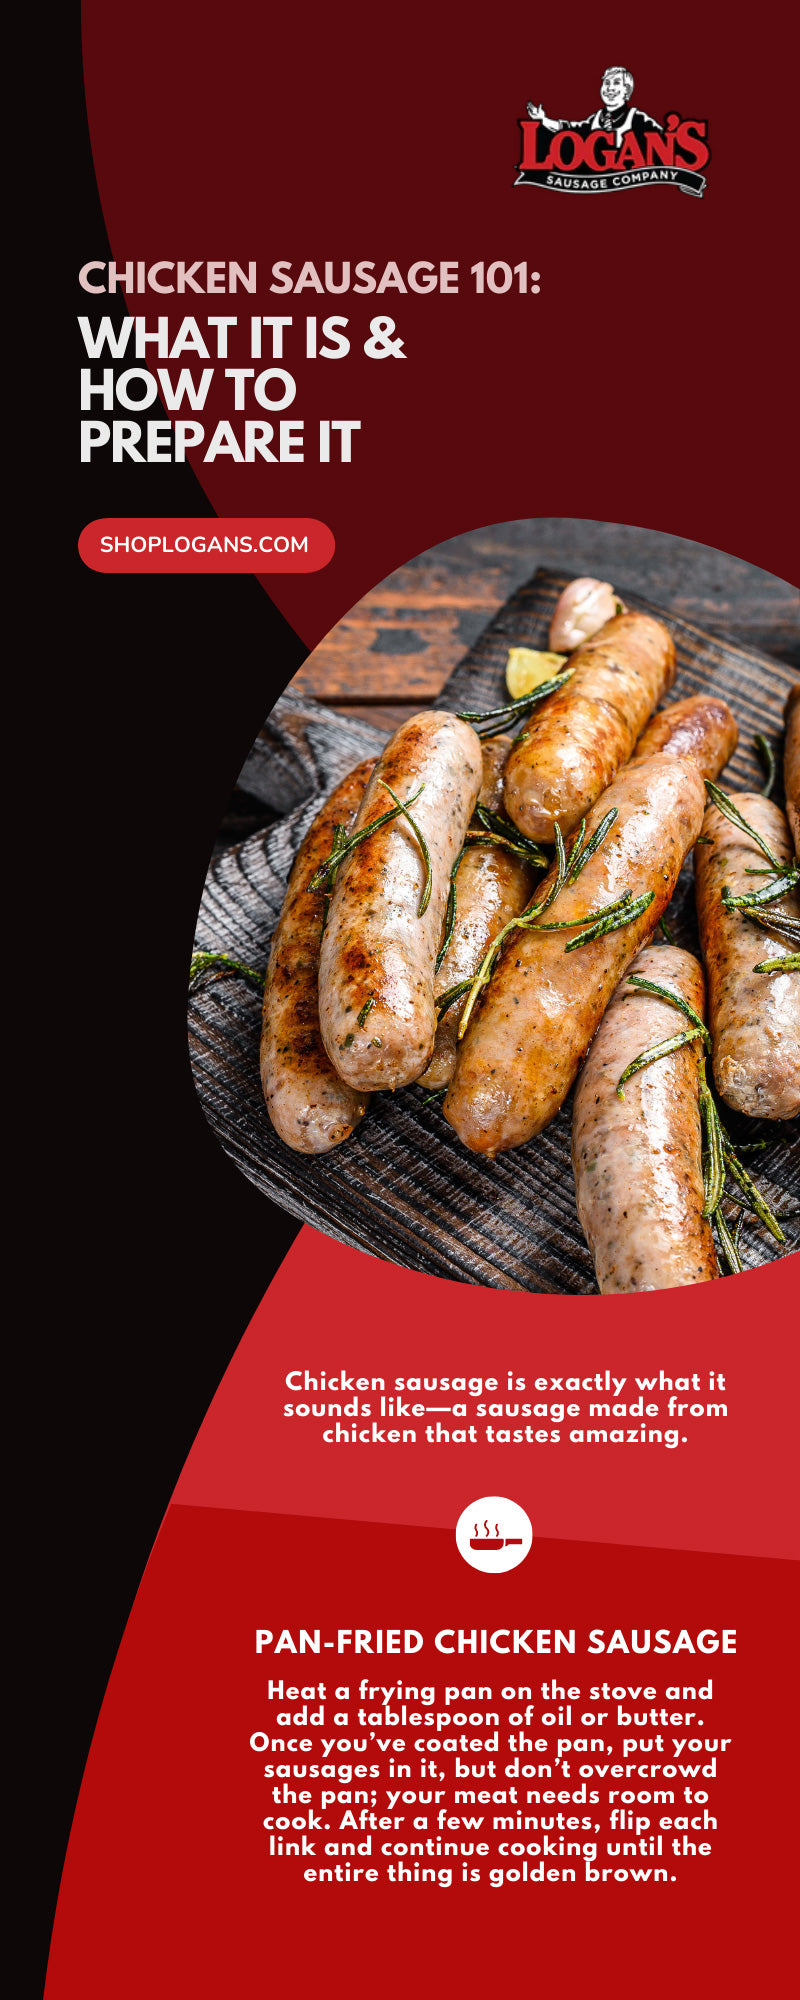 Chicken Sausage 101: What It Is & How To Prepare It